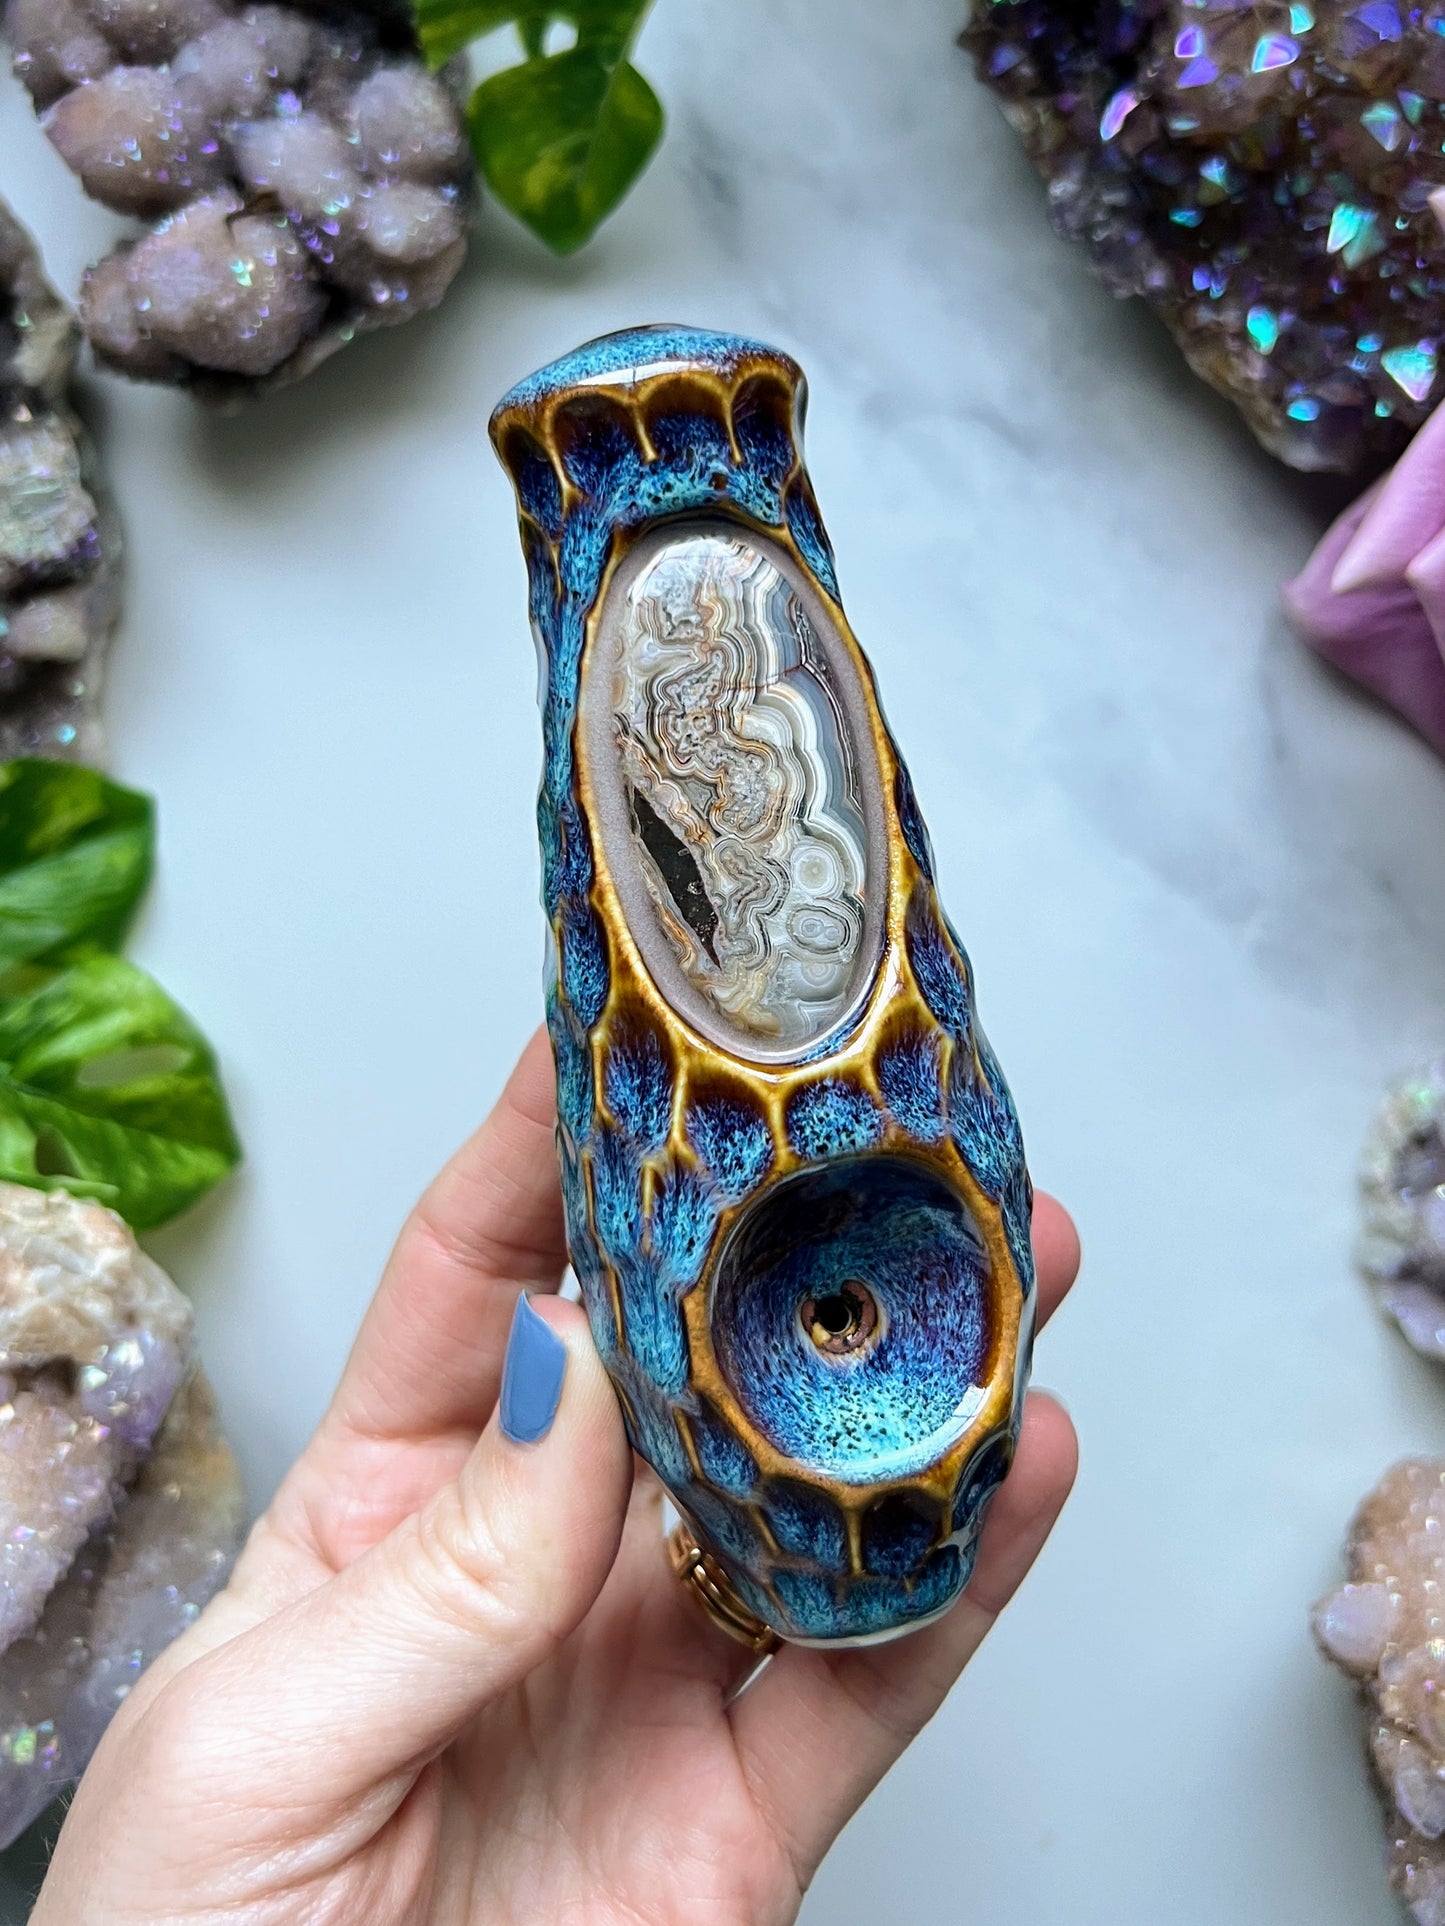 Crazy Lace Agate Pipe Honey Comb Carved Details, Porcelain Ceramic Smoking Pipe